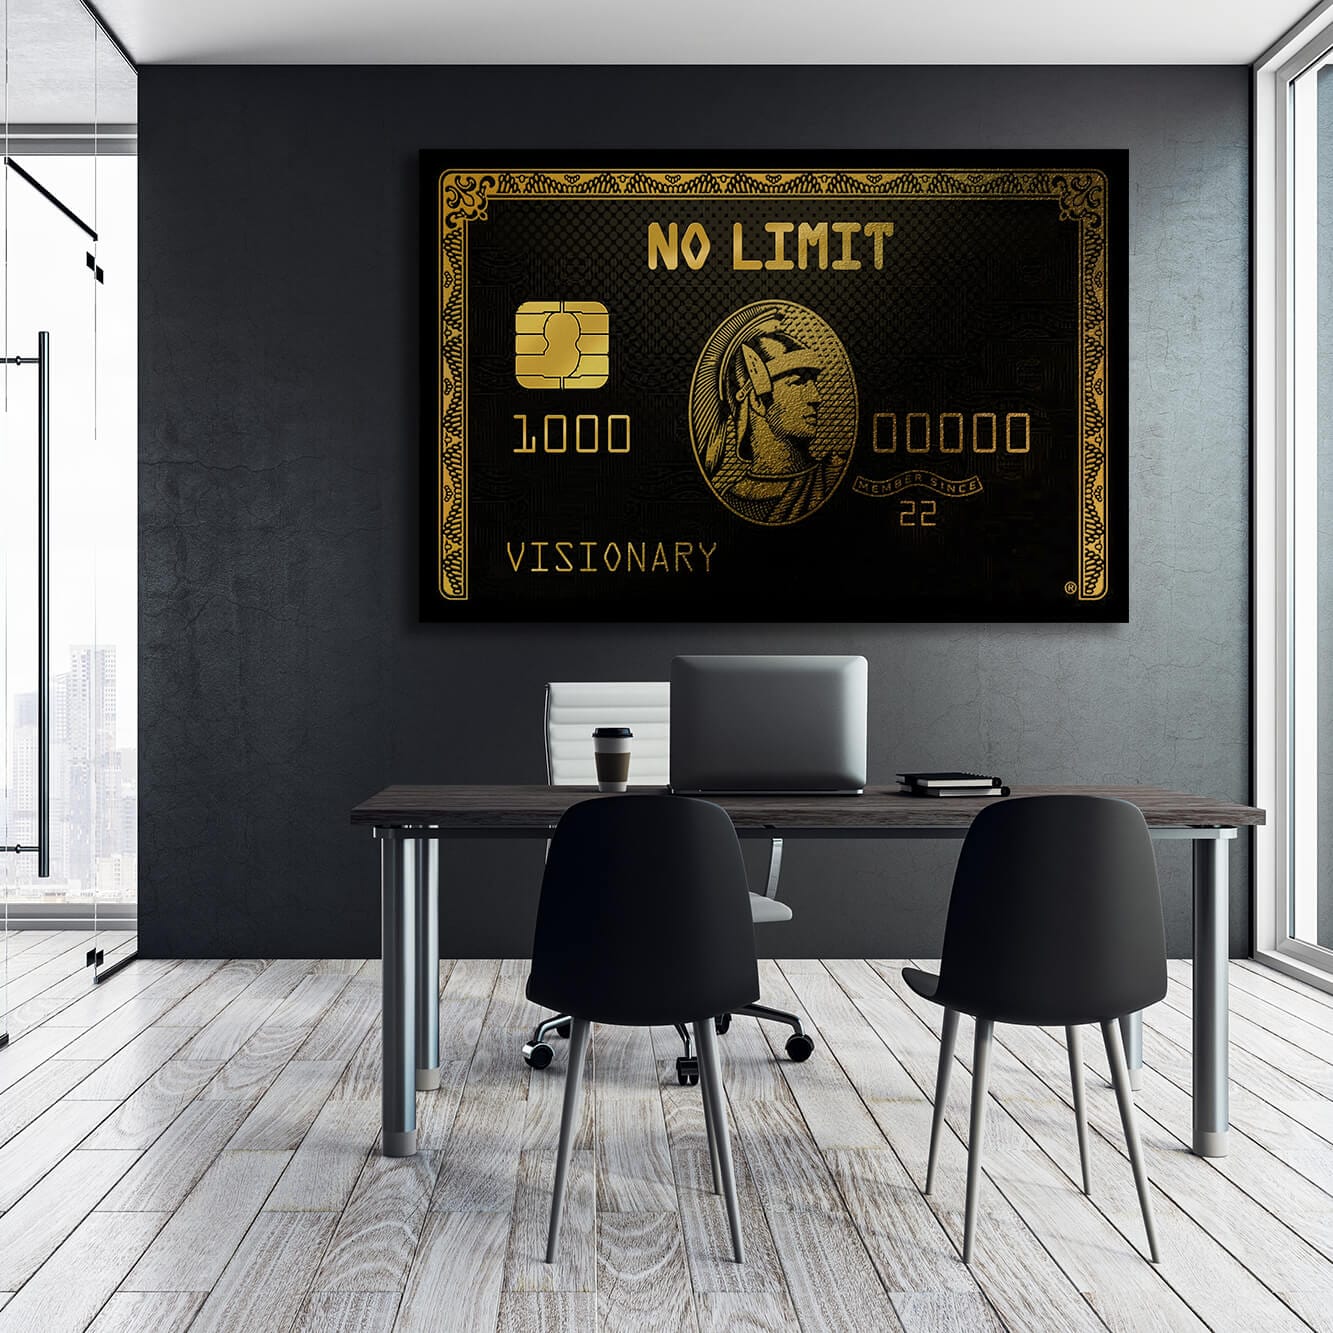 No Limit Visionary Wall Art | Inspirational Wall Art Motivational Wall Art Quotes Office Art | ImpaktMaker Exclusive Canvas Art Landscape